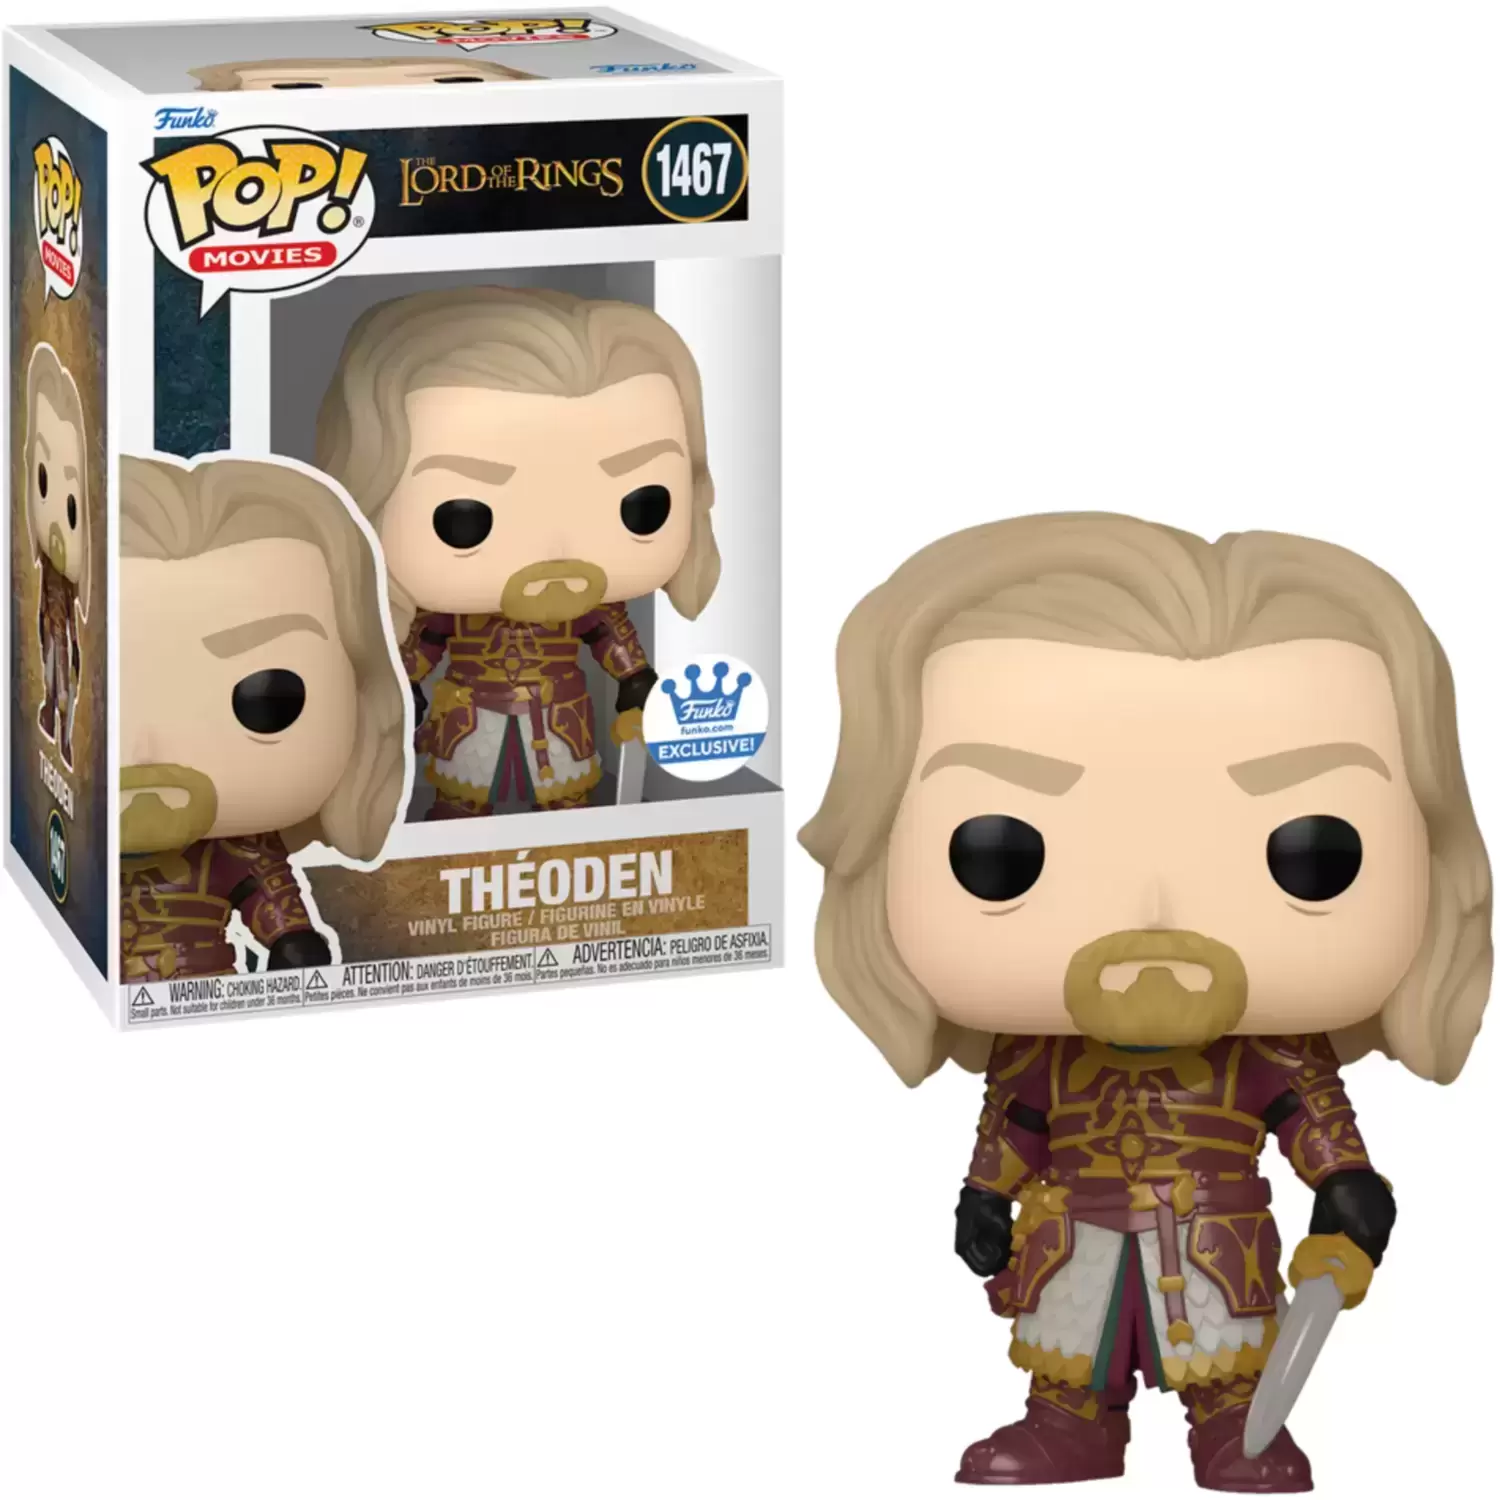 The Lord Of The Rings - Théoden - figurine POP 1467 POP! Movies